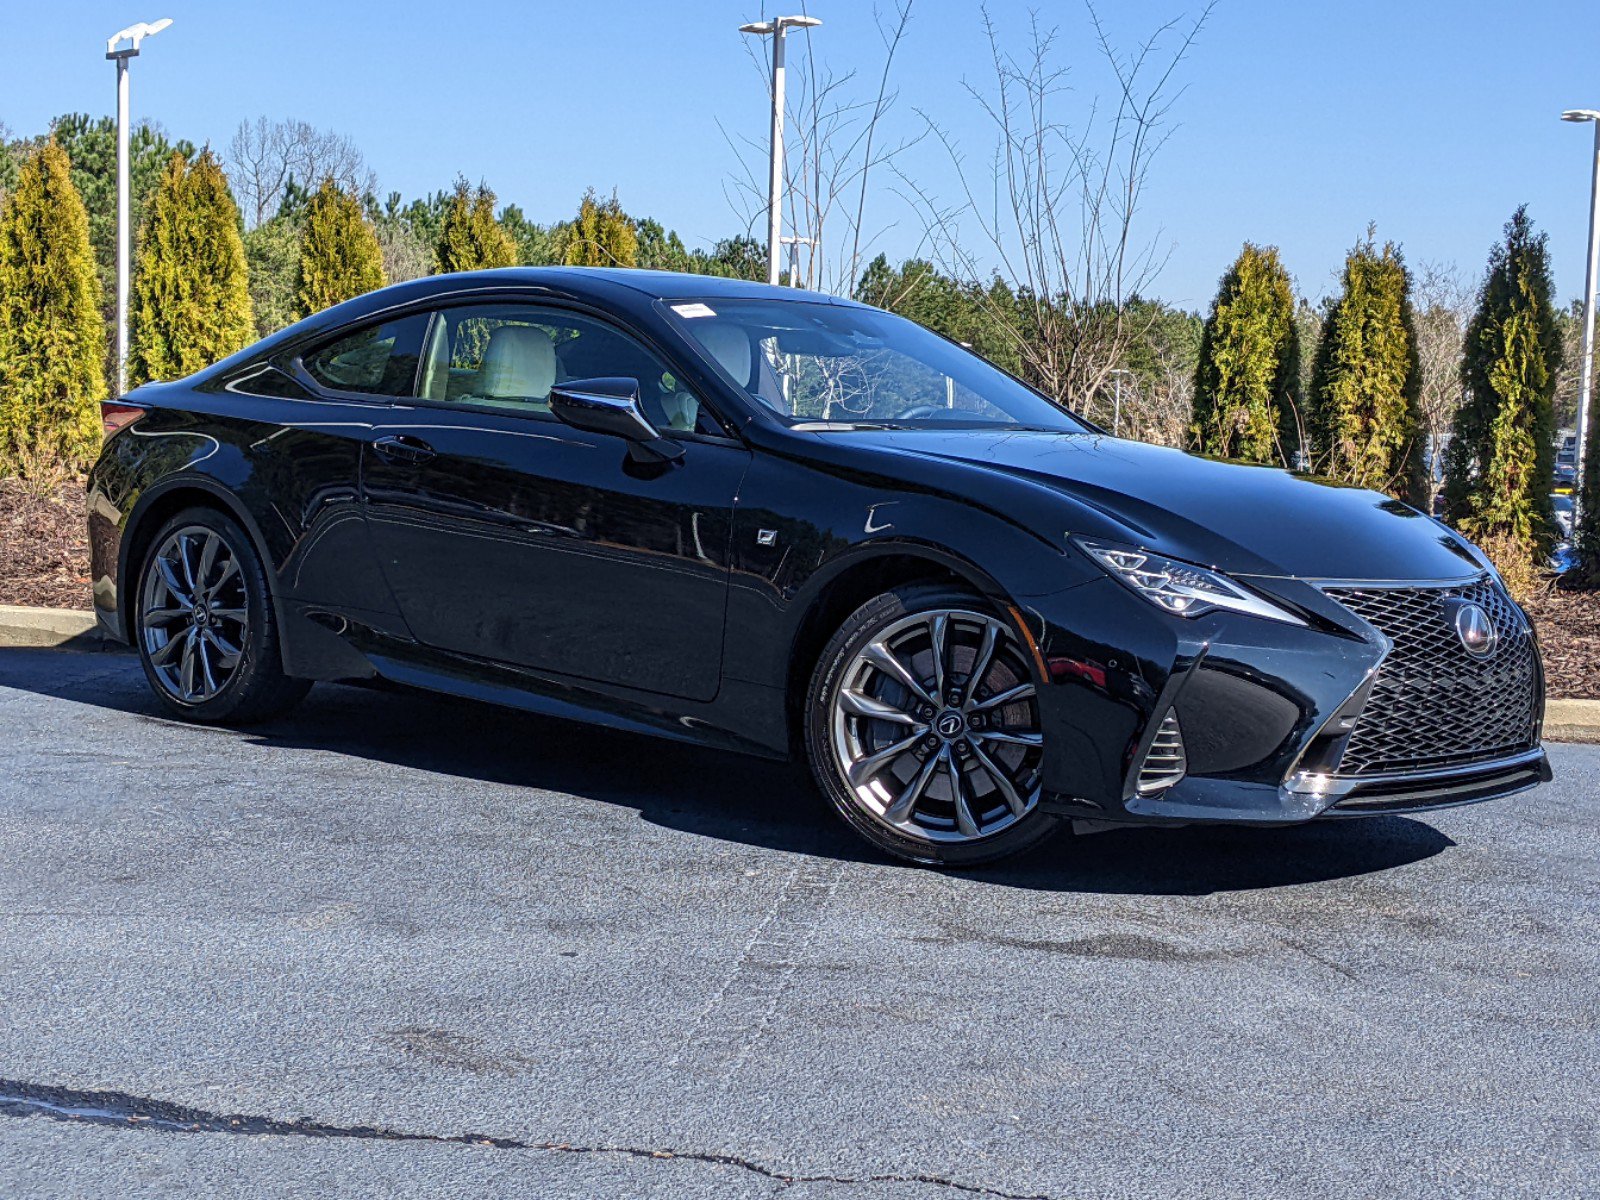 Pre-Owned 2022 Lexus RC RC 350 F SPORT RWD Coupe in Merriam #P9406 |  Hendrick Chevrolet Shawnee Mission